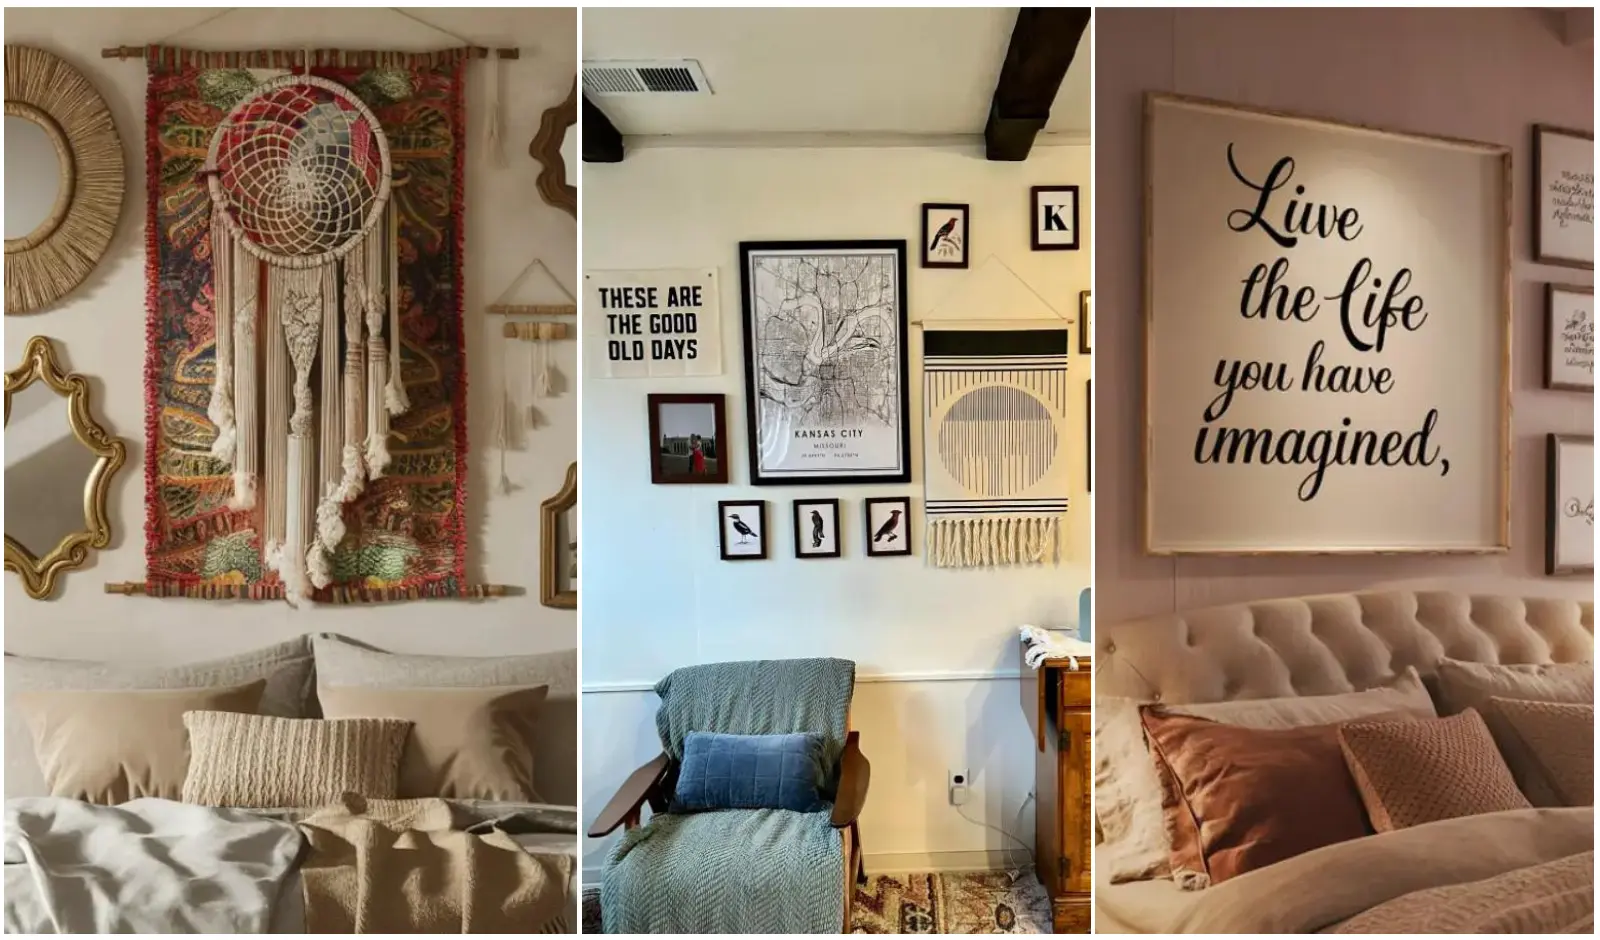 10+ Bedroom Wall Collage Ideas to Transform Your Space (Plus Tips)